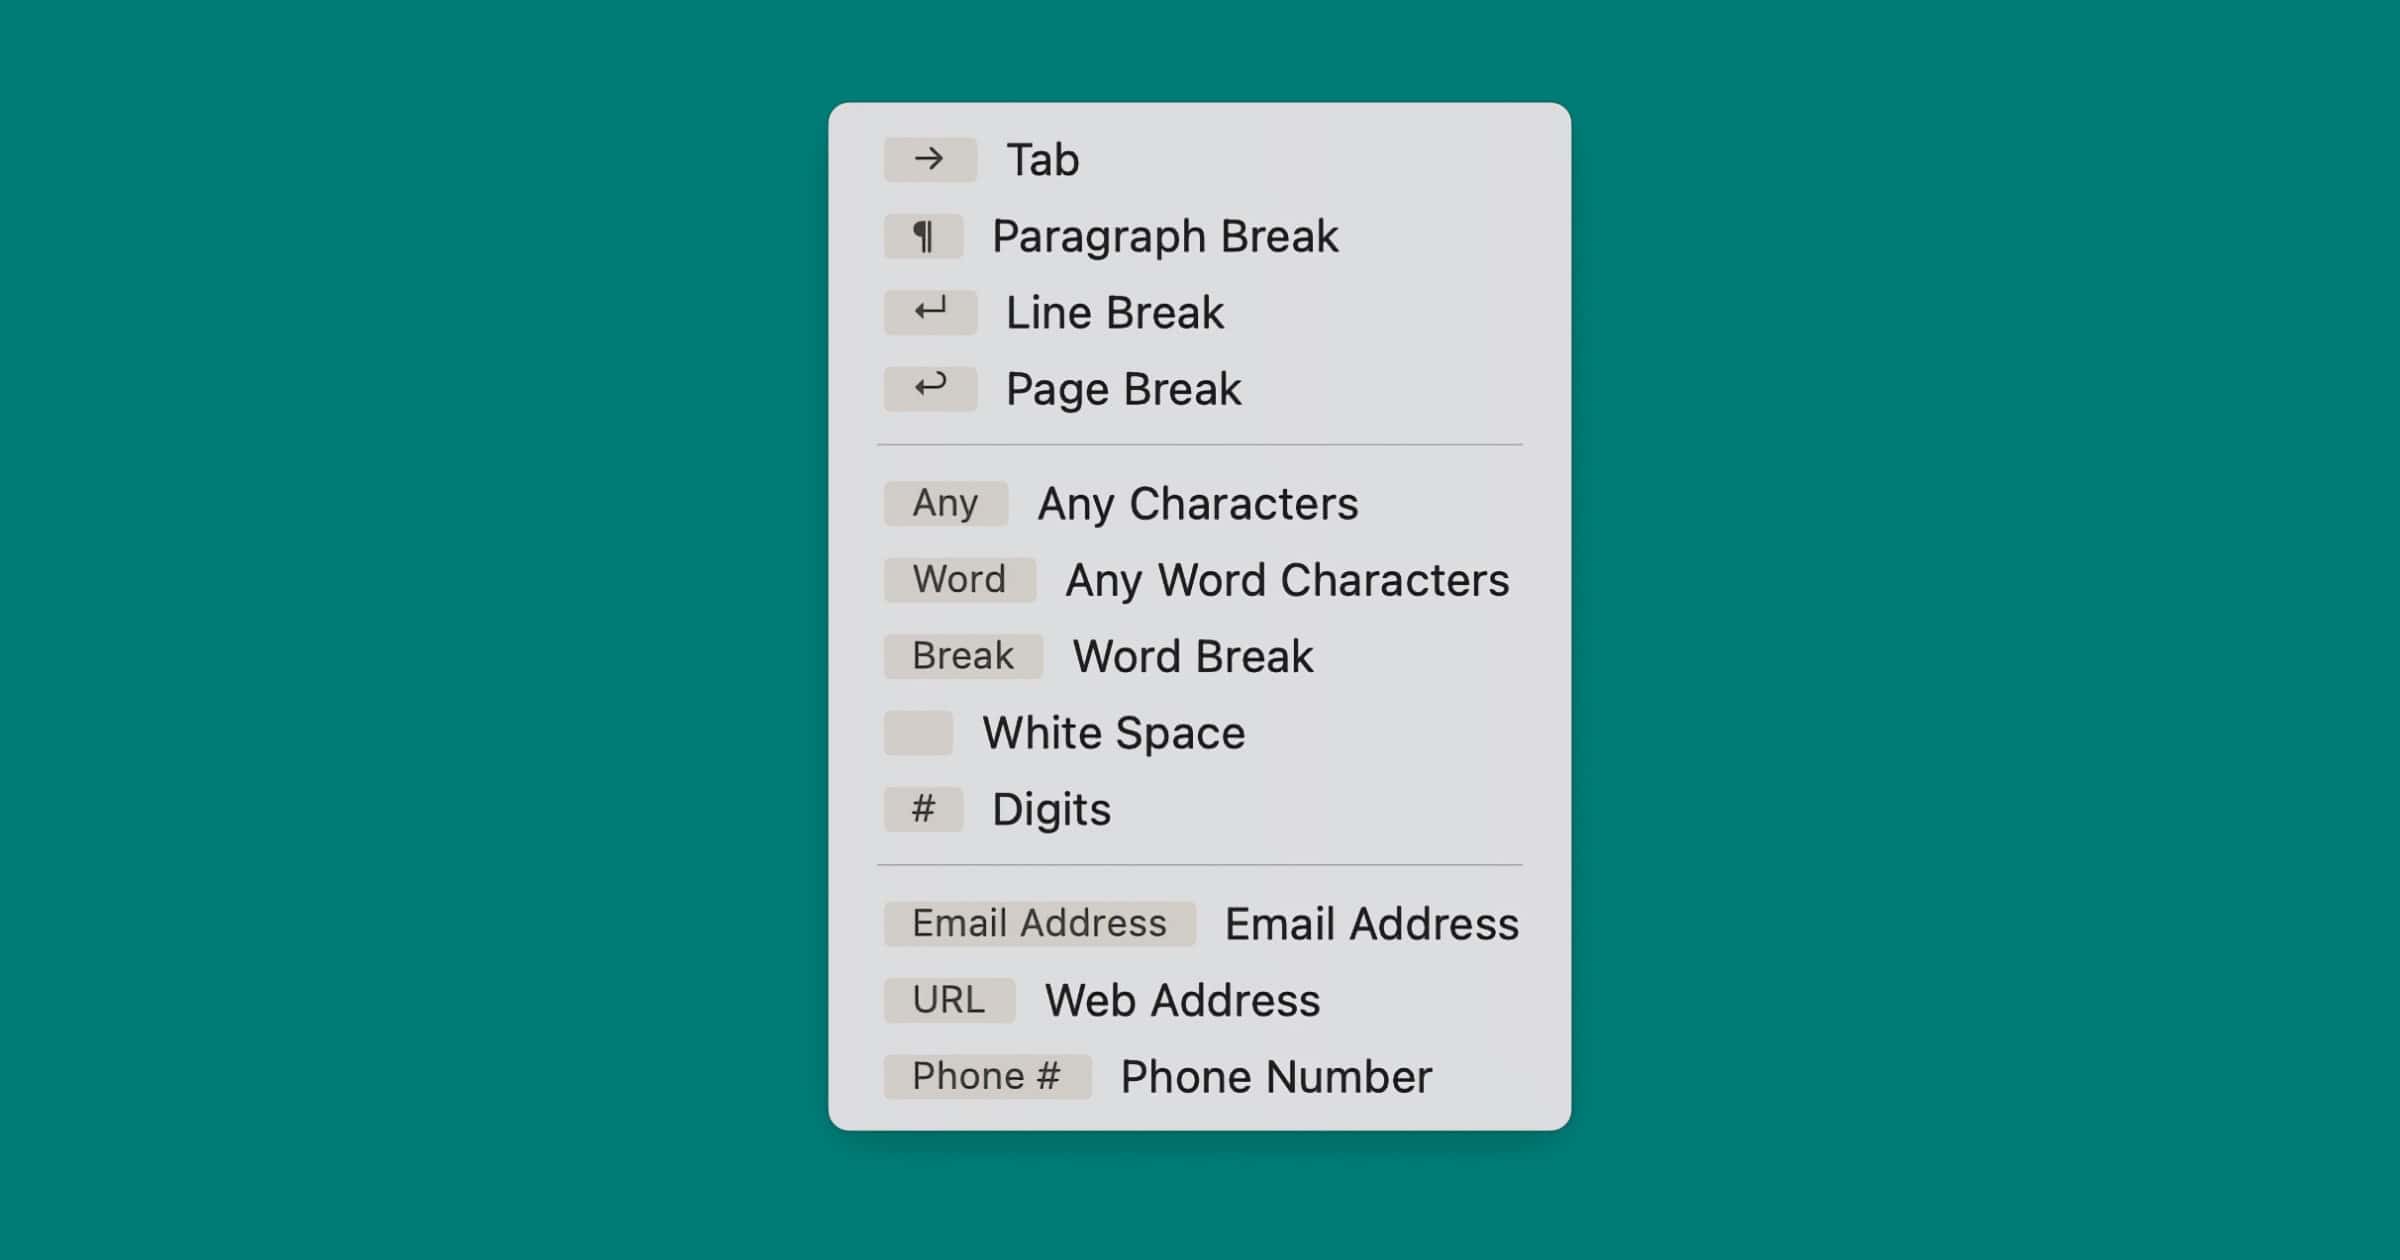 Show word count and other statistics in Pages on Mac – Apple Support (UK)